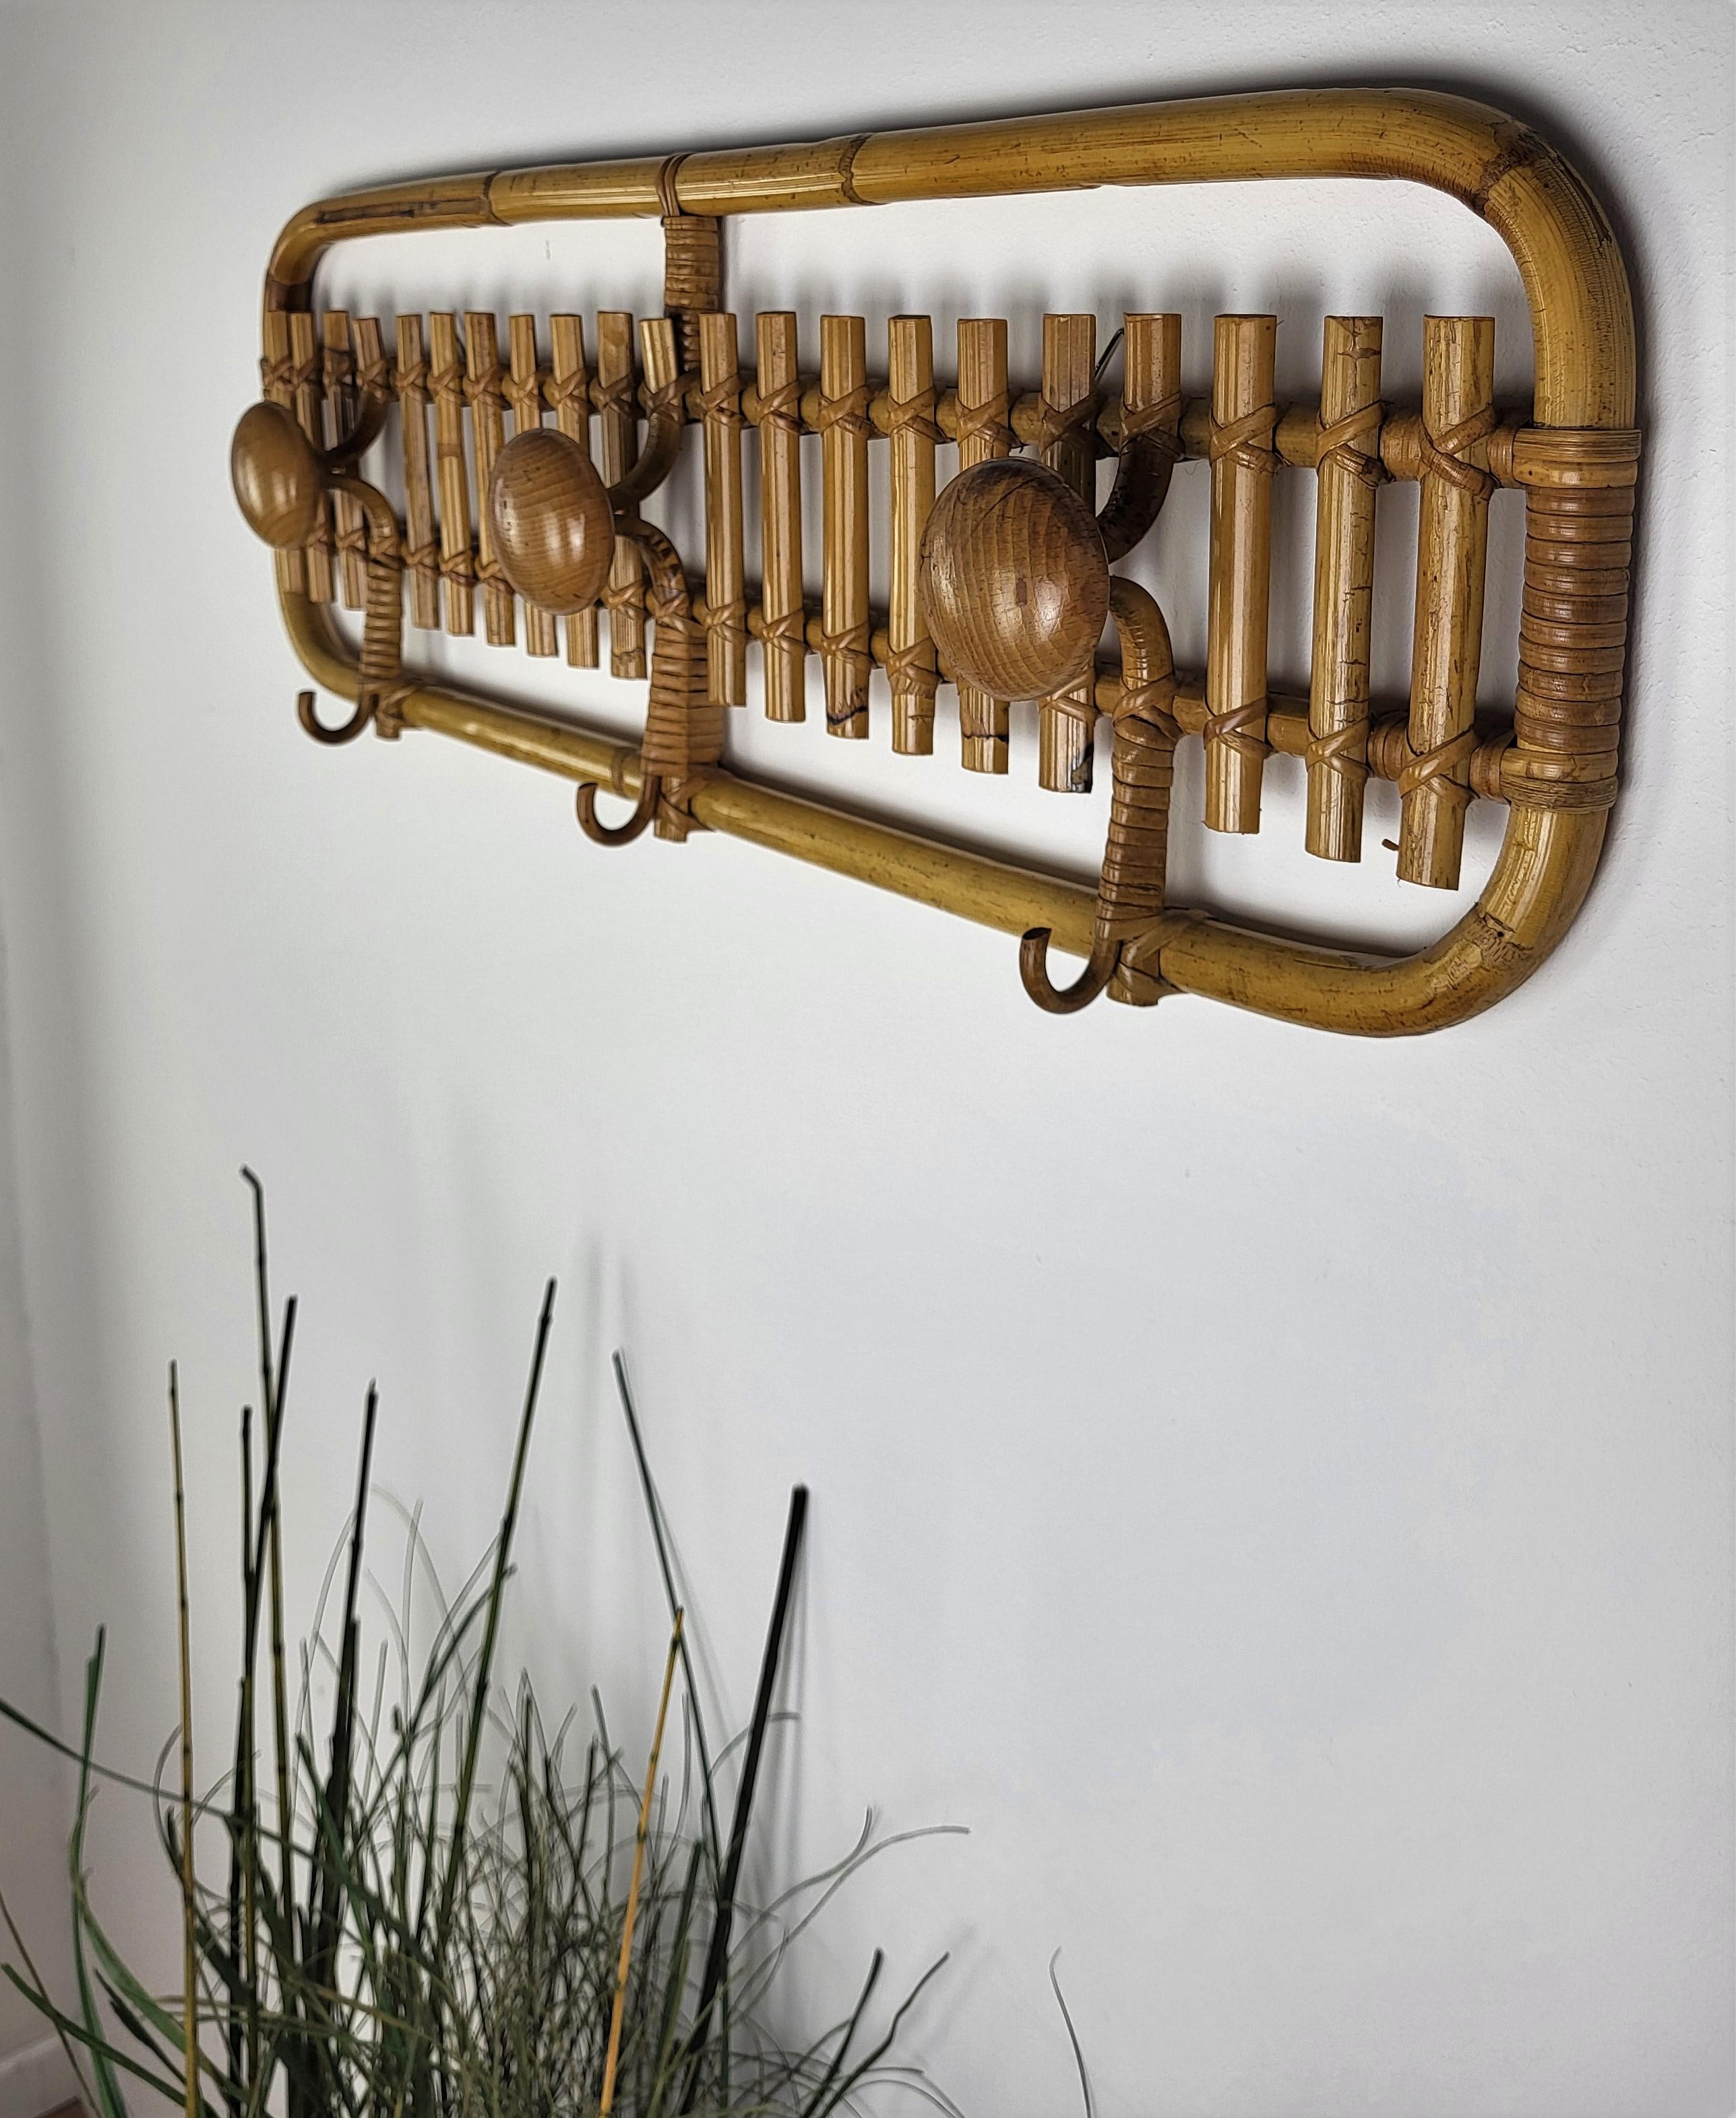 Beautiful 1960s Italian Mid-Century Modern coat hanger rack, perfect in any entrance hallway or room for coats and bags as well as in a bedroom or bathroom for bathrobes and towels. This charming piece is in the typical style of Audoux and Minet